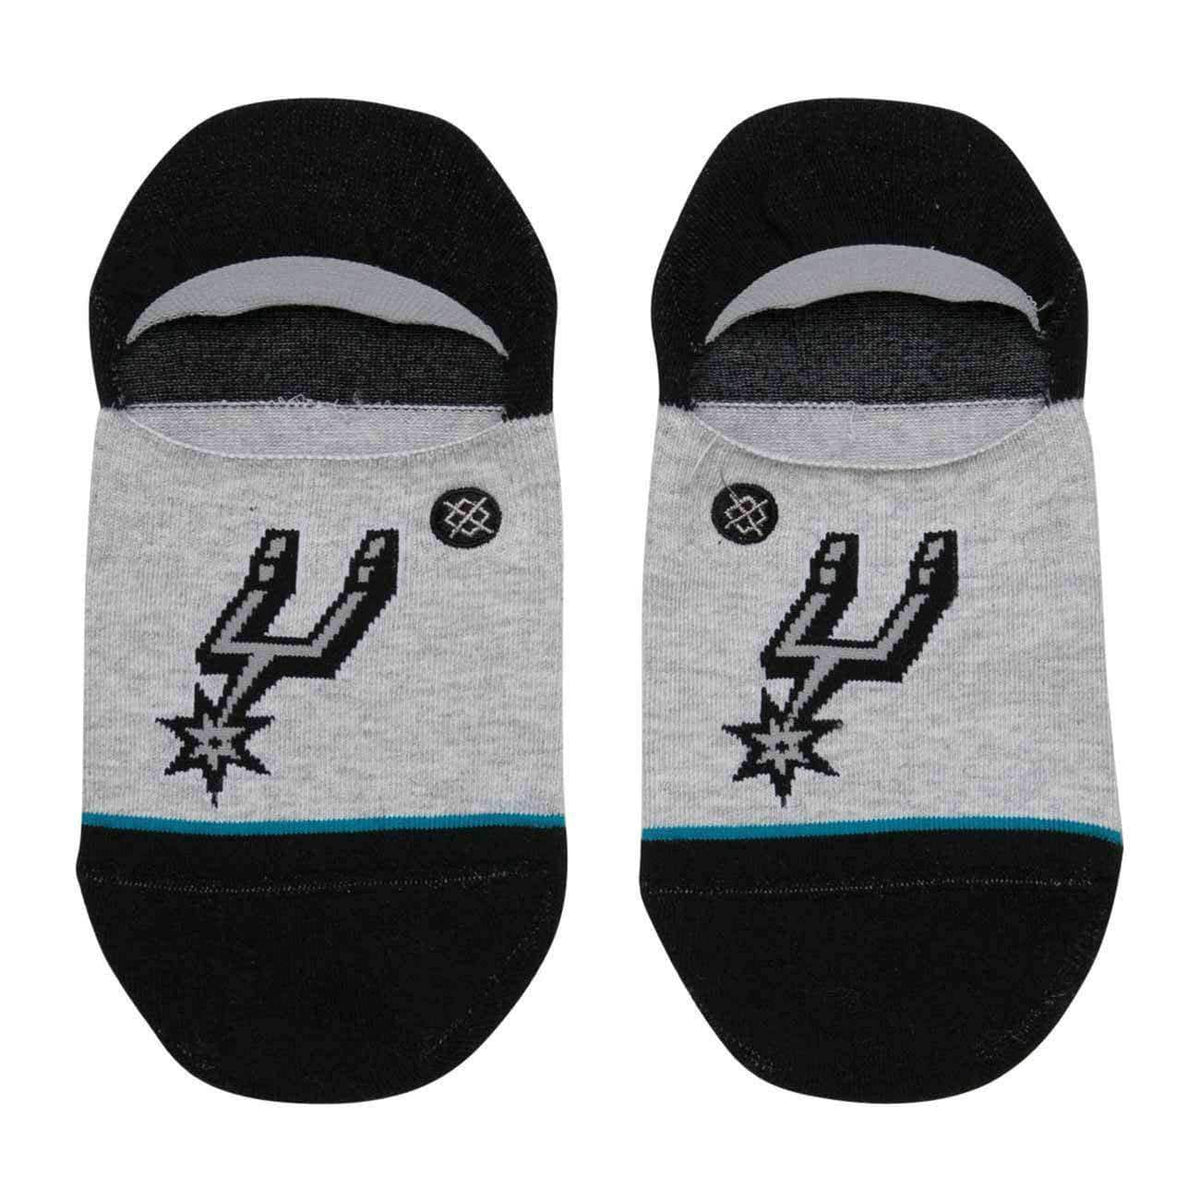 Stance NBA Arena Spurs Invisible Low Socks in Heather Grey Mens Low/Ankle Socks by Stance